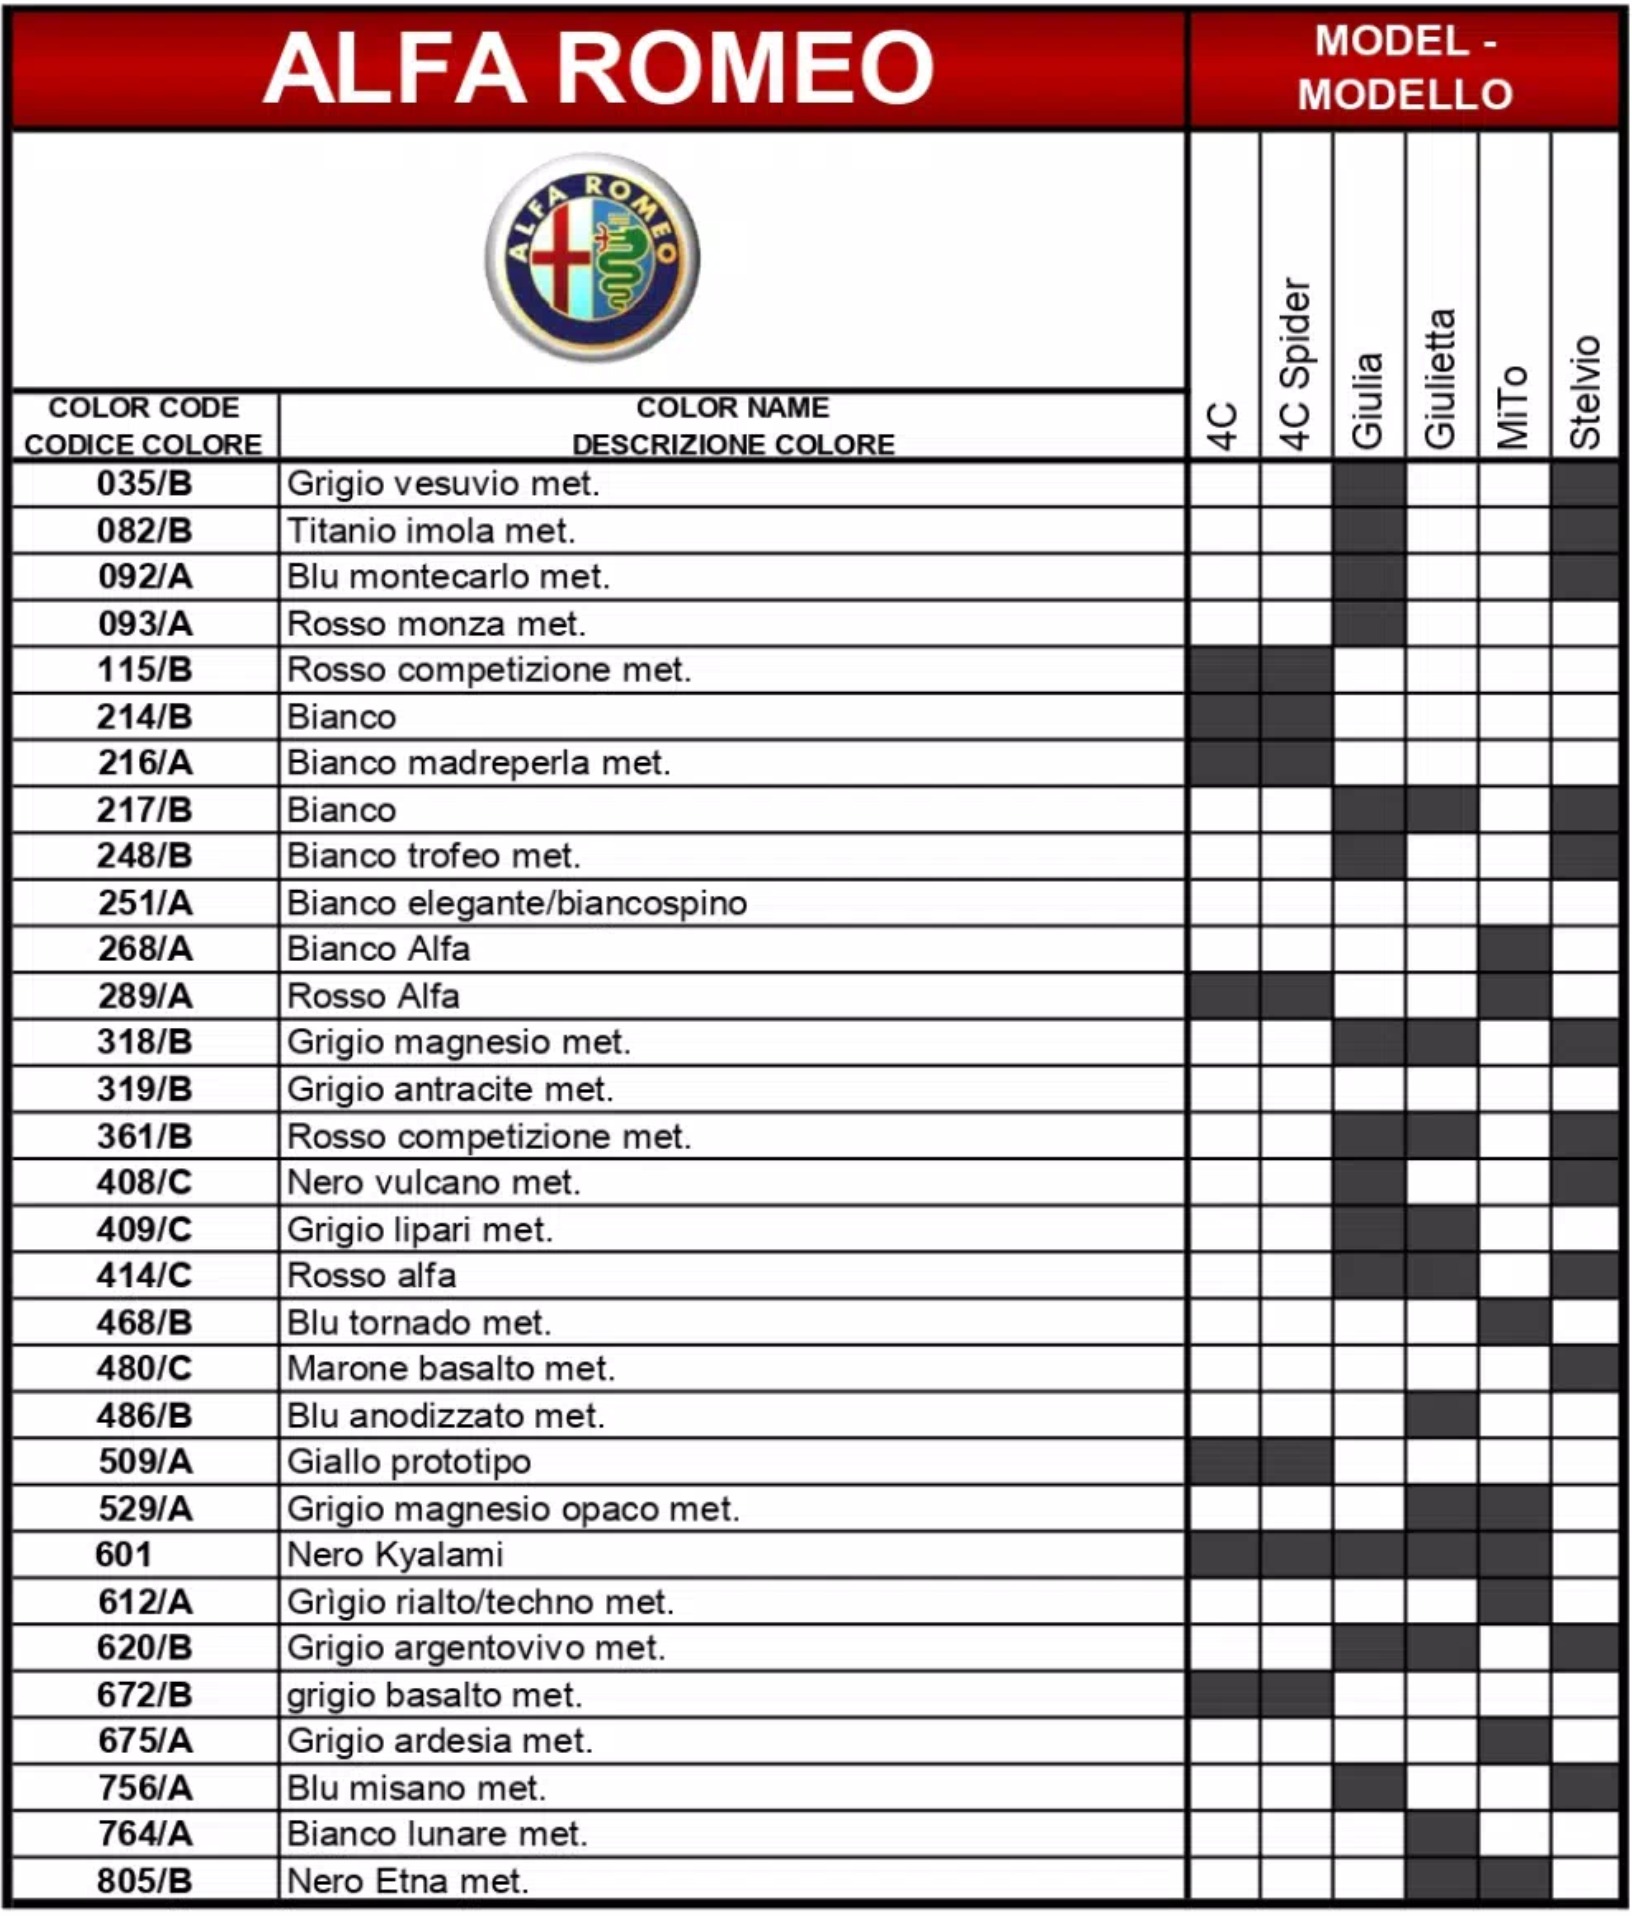 Paint codes, to color names to models for all 2018 Alfa Romeo vehicles